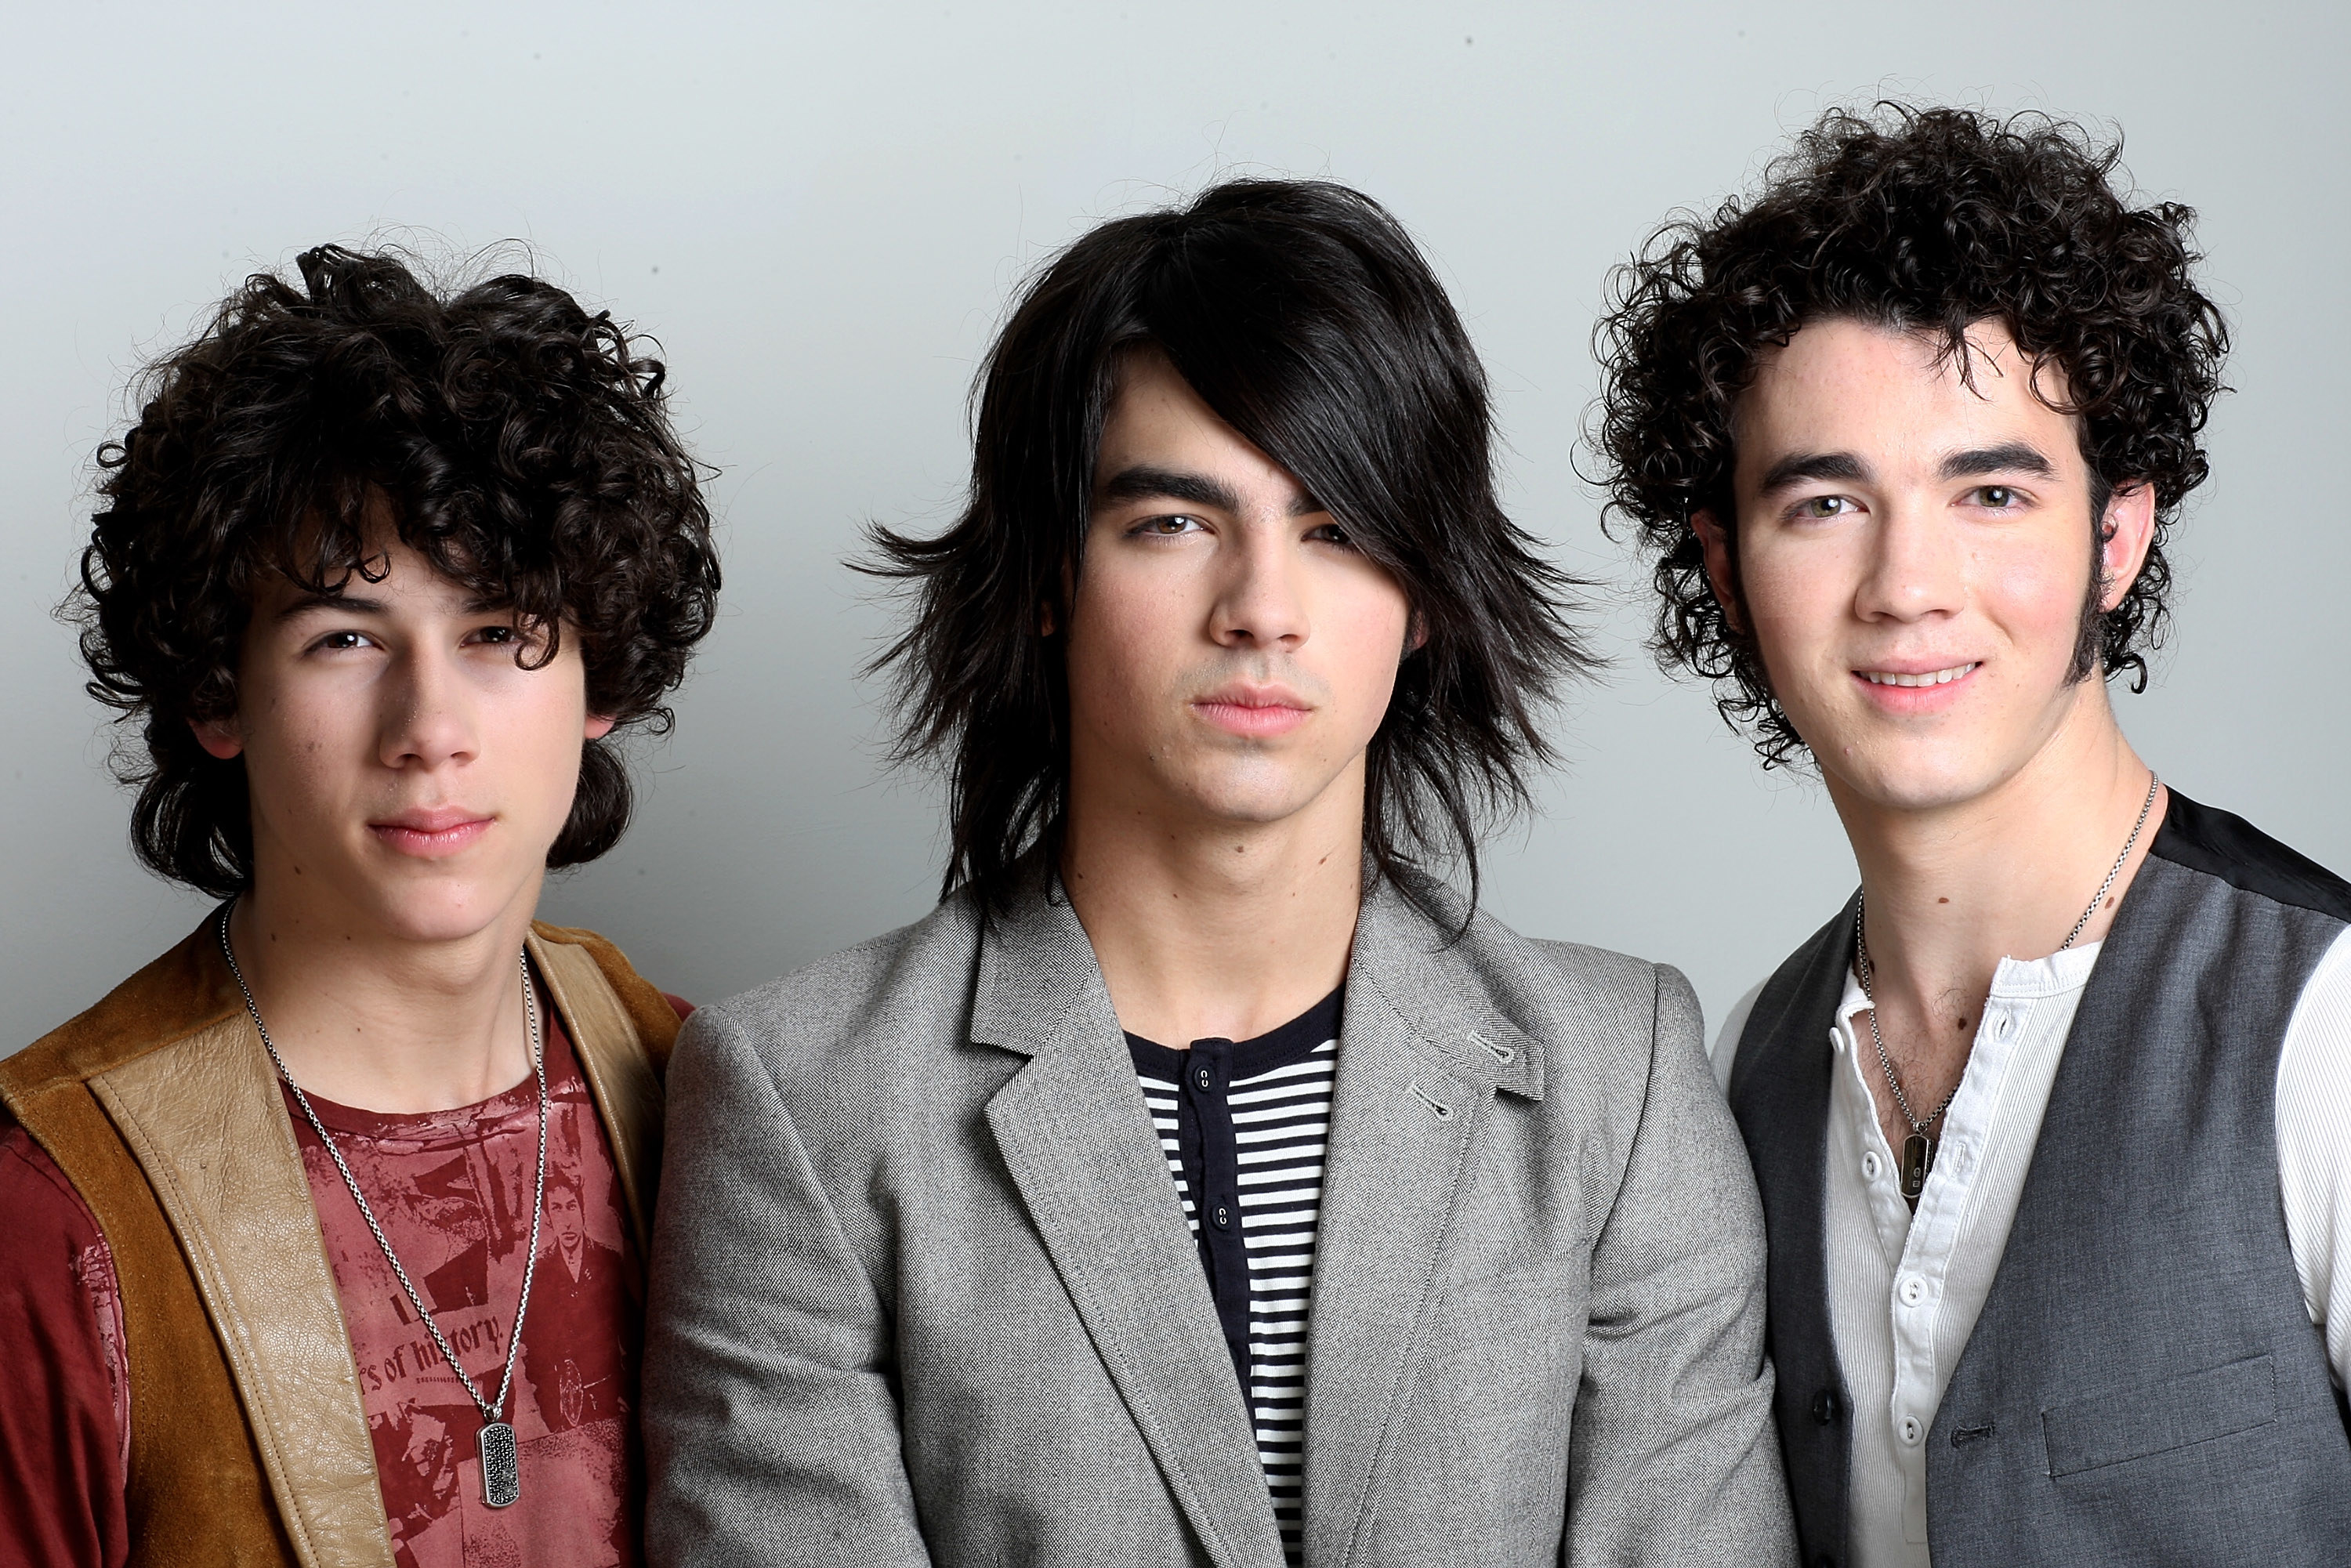 Nick, Joe and Kevin Jonas pose together for a photo a show at a Universal Records conference in 2008